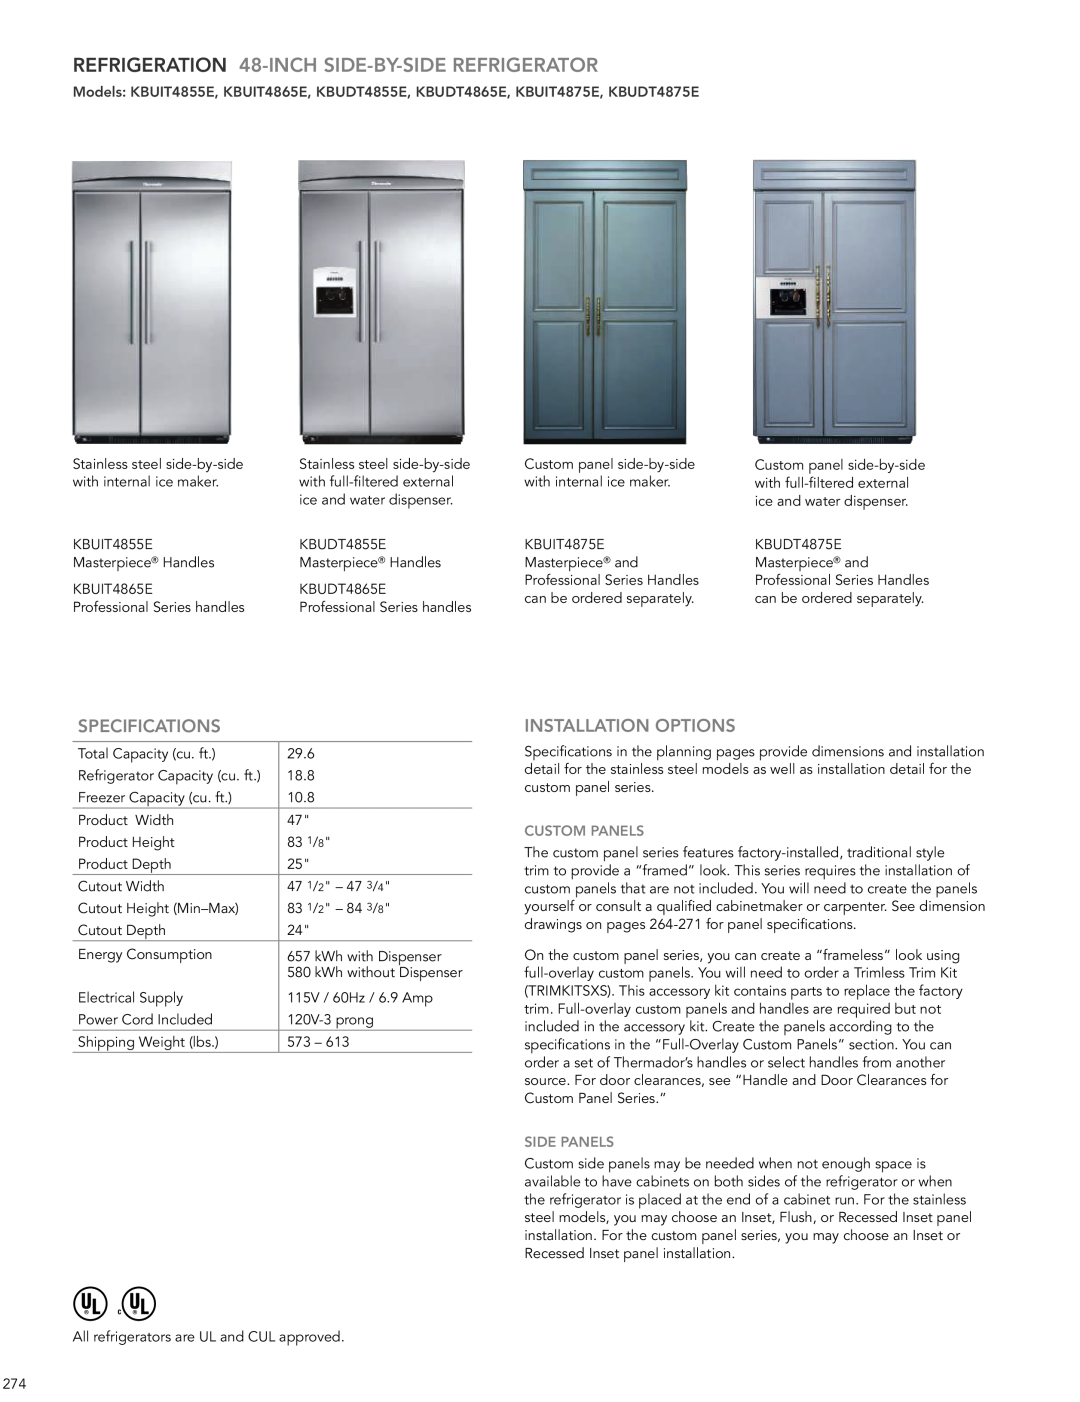 Thermador KBUIT4255E manual REFRIGERATION 48-INCH SIDE-BY-SIDEREFRIGERATOR, Specifications, Installation Options 